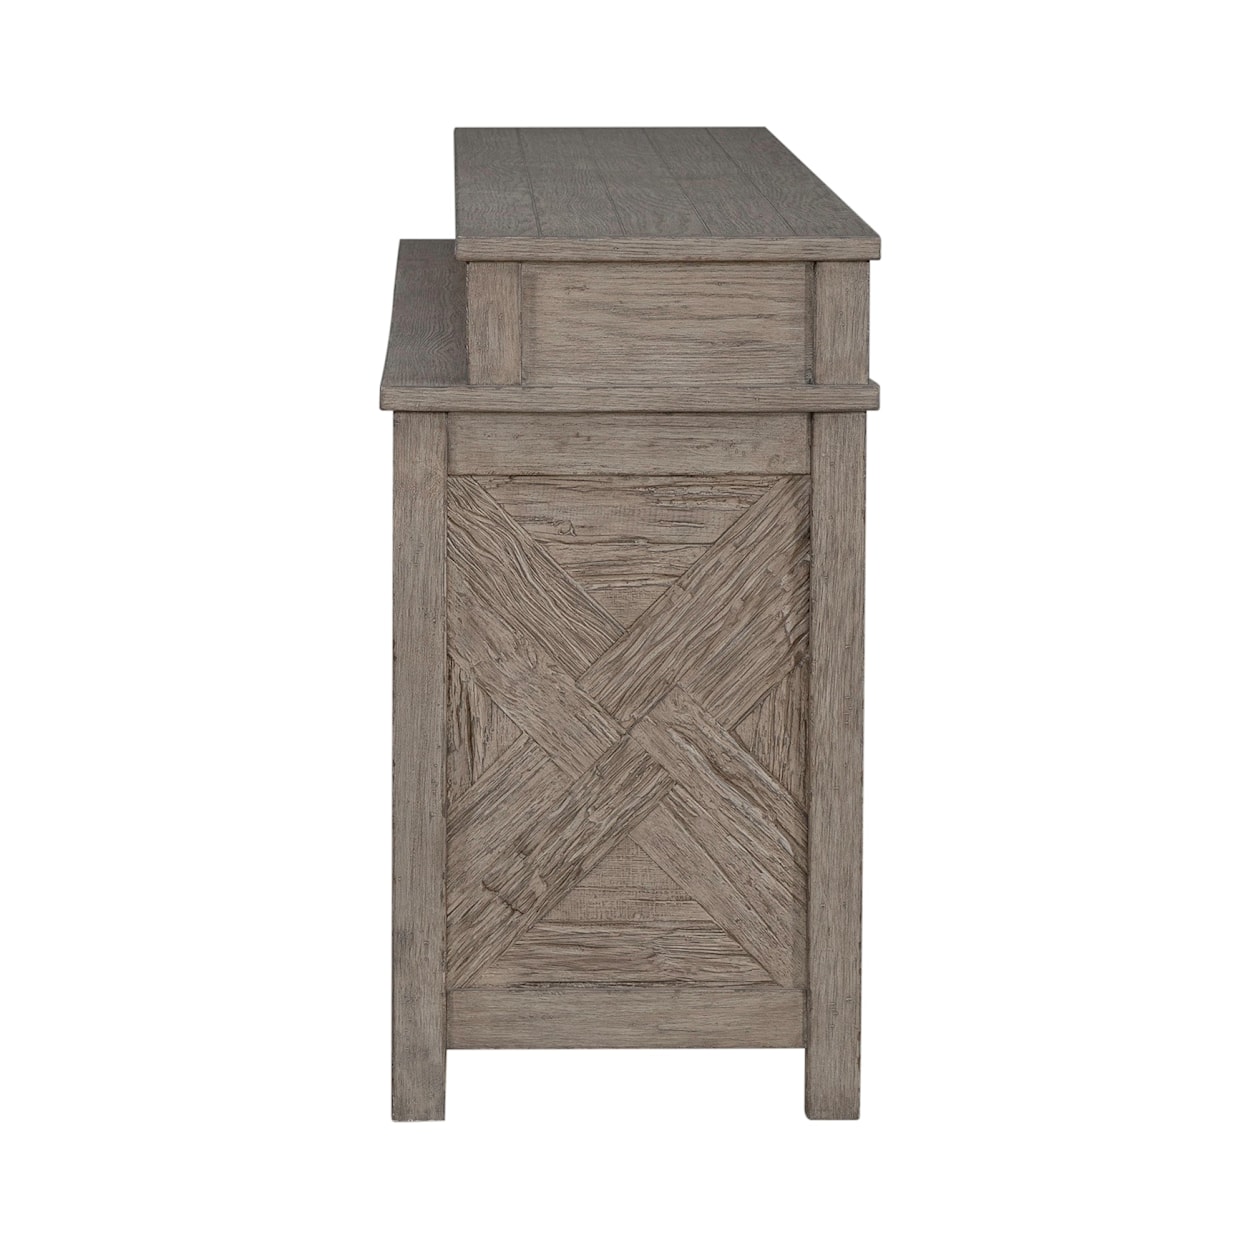 Libby Skyview Lodge Console Counter-Height Table